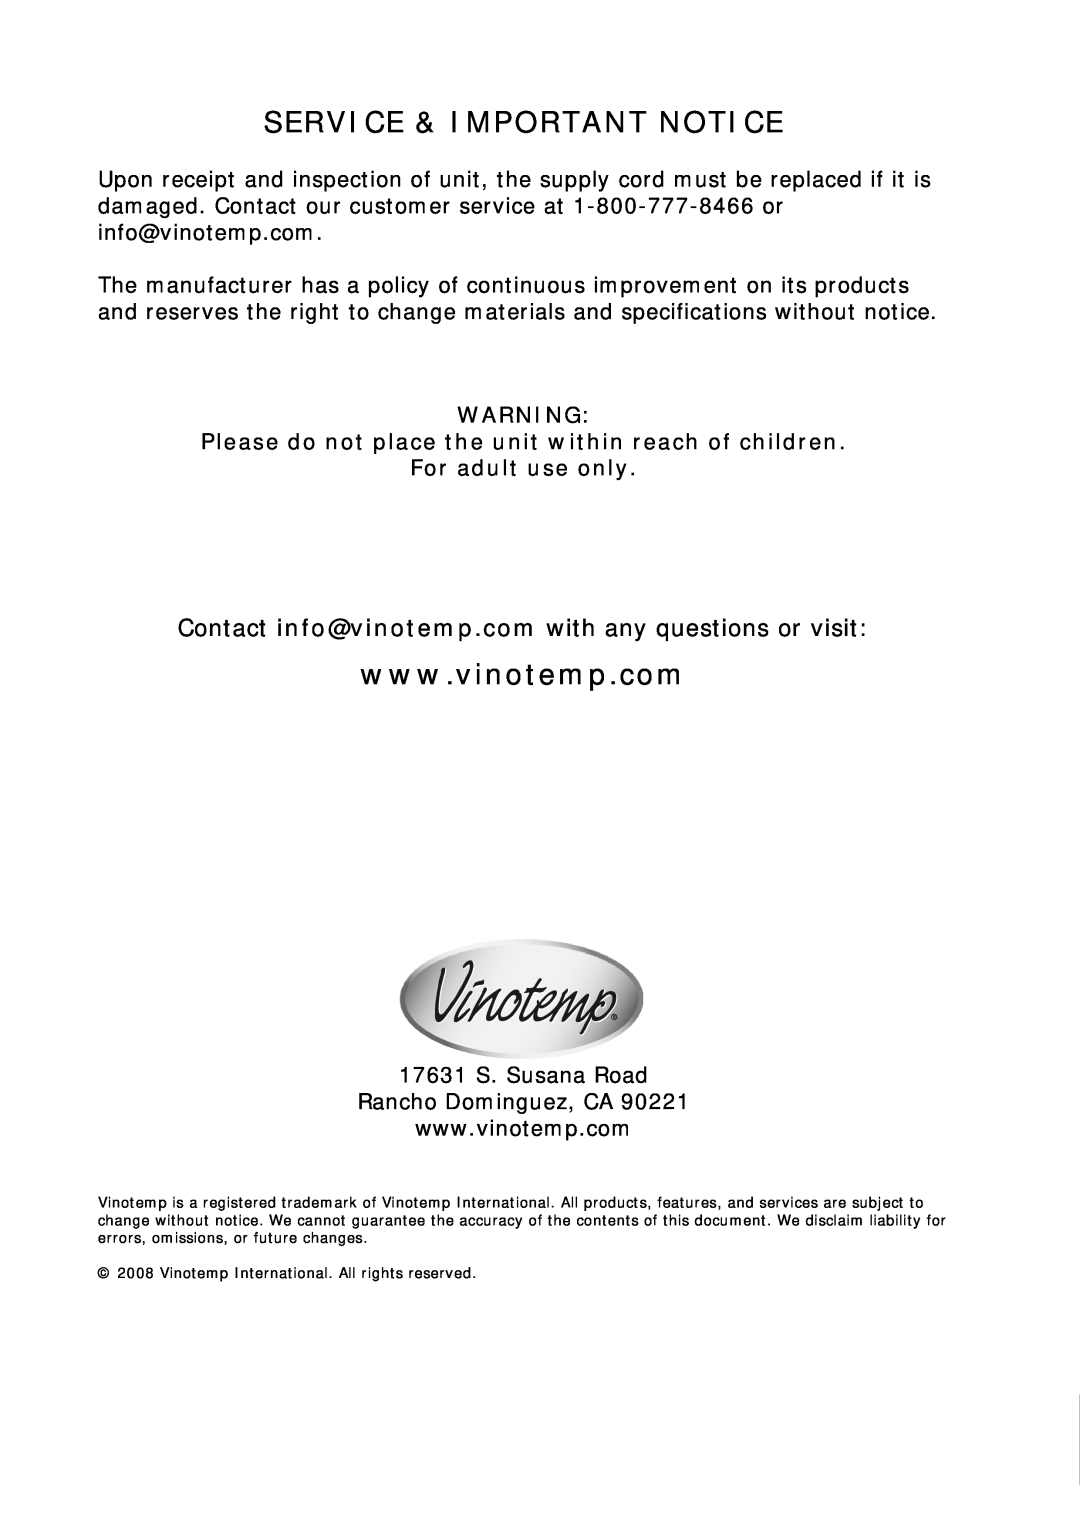 Vinotemp VT-BC-1 manual Service & Important Notice, For adult use only 